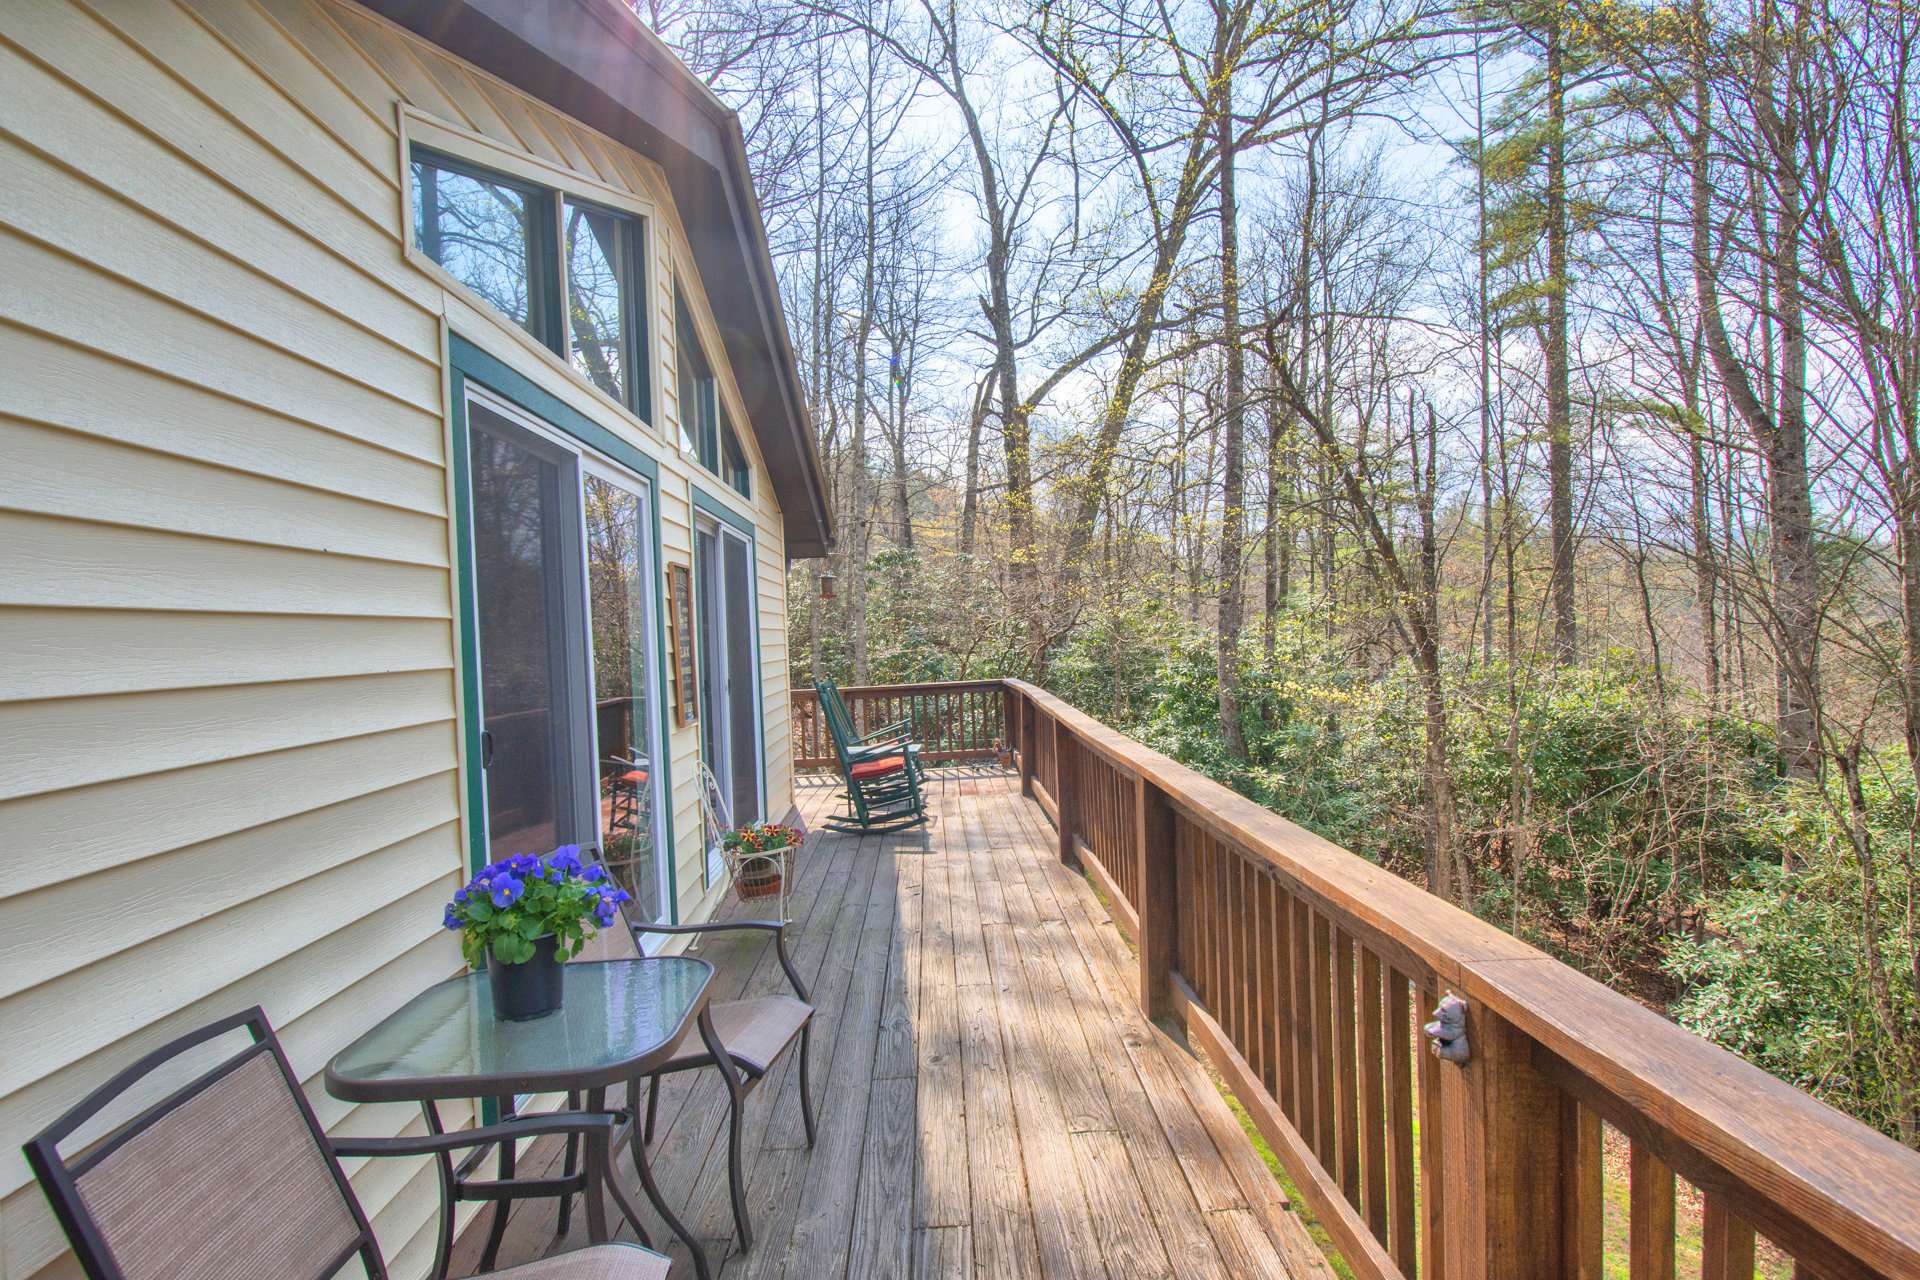 A deck wraps around three sides of the cottage and provides lots of space for outdoor grilling, dining and entertaining.